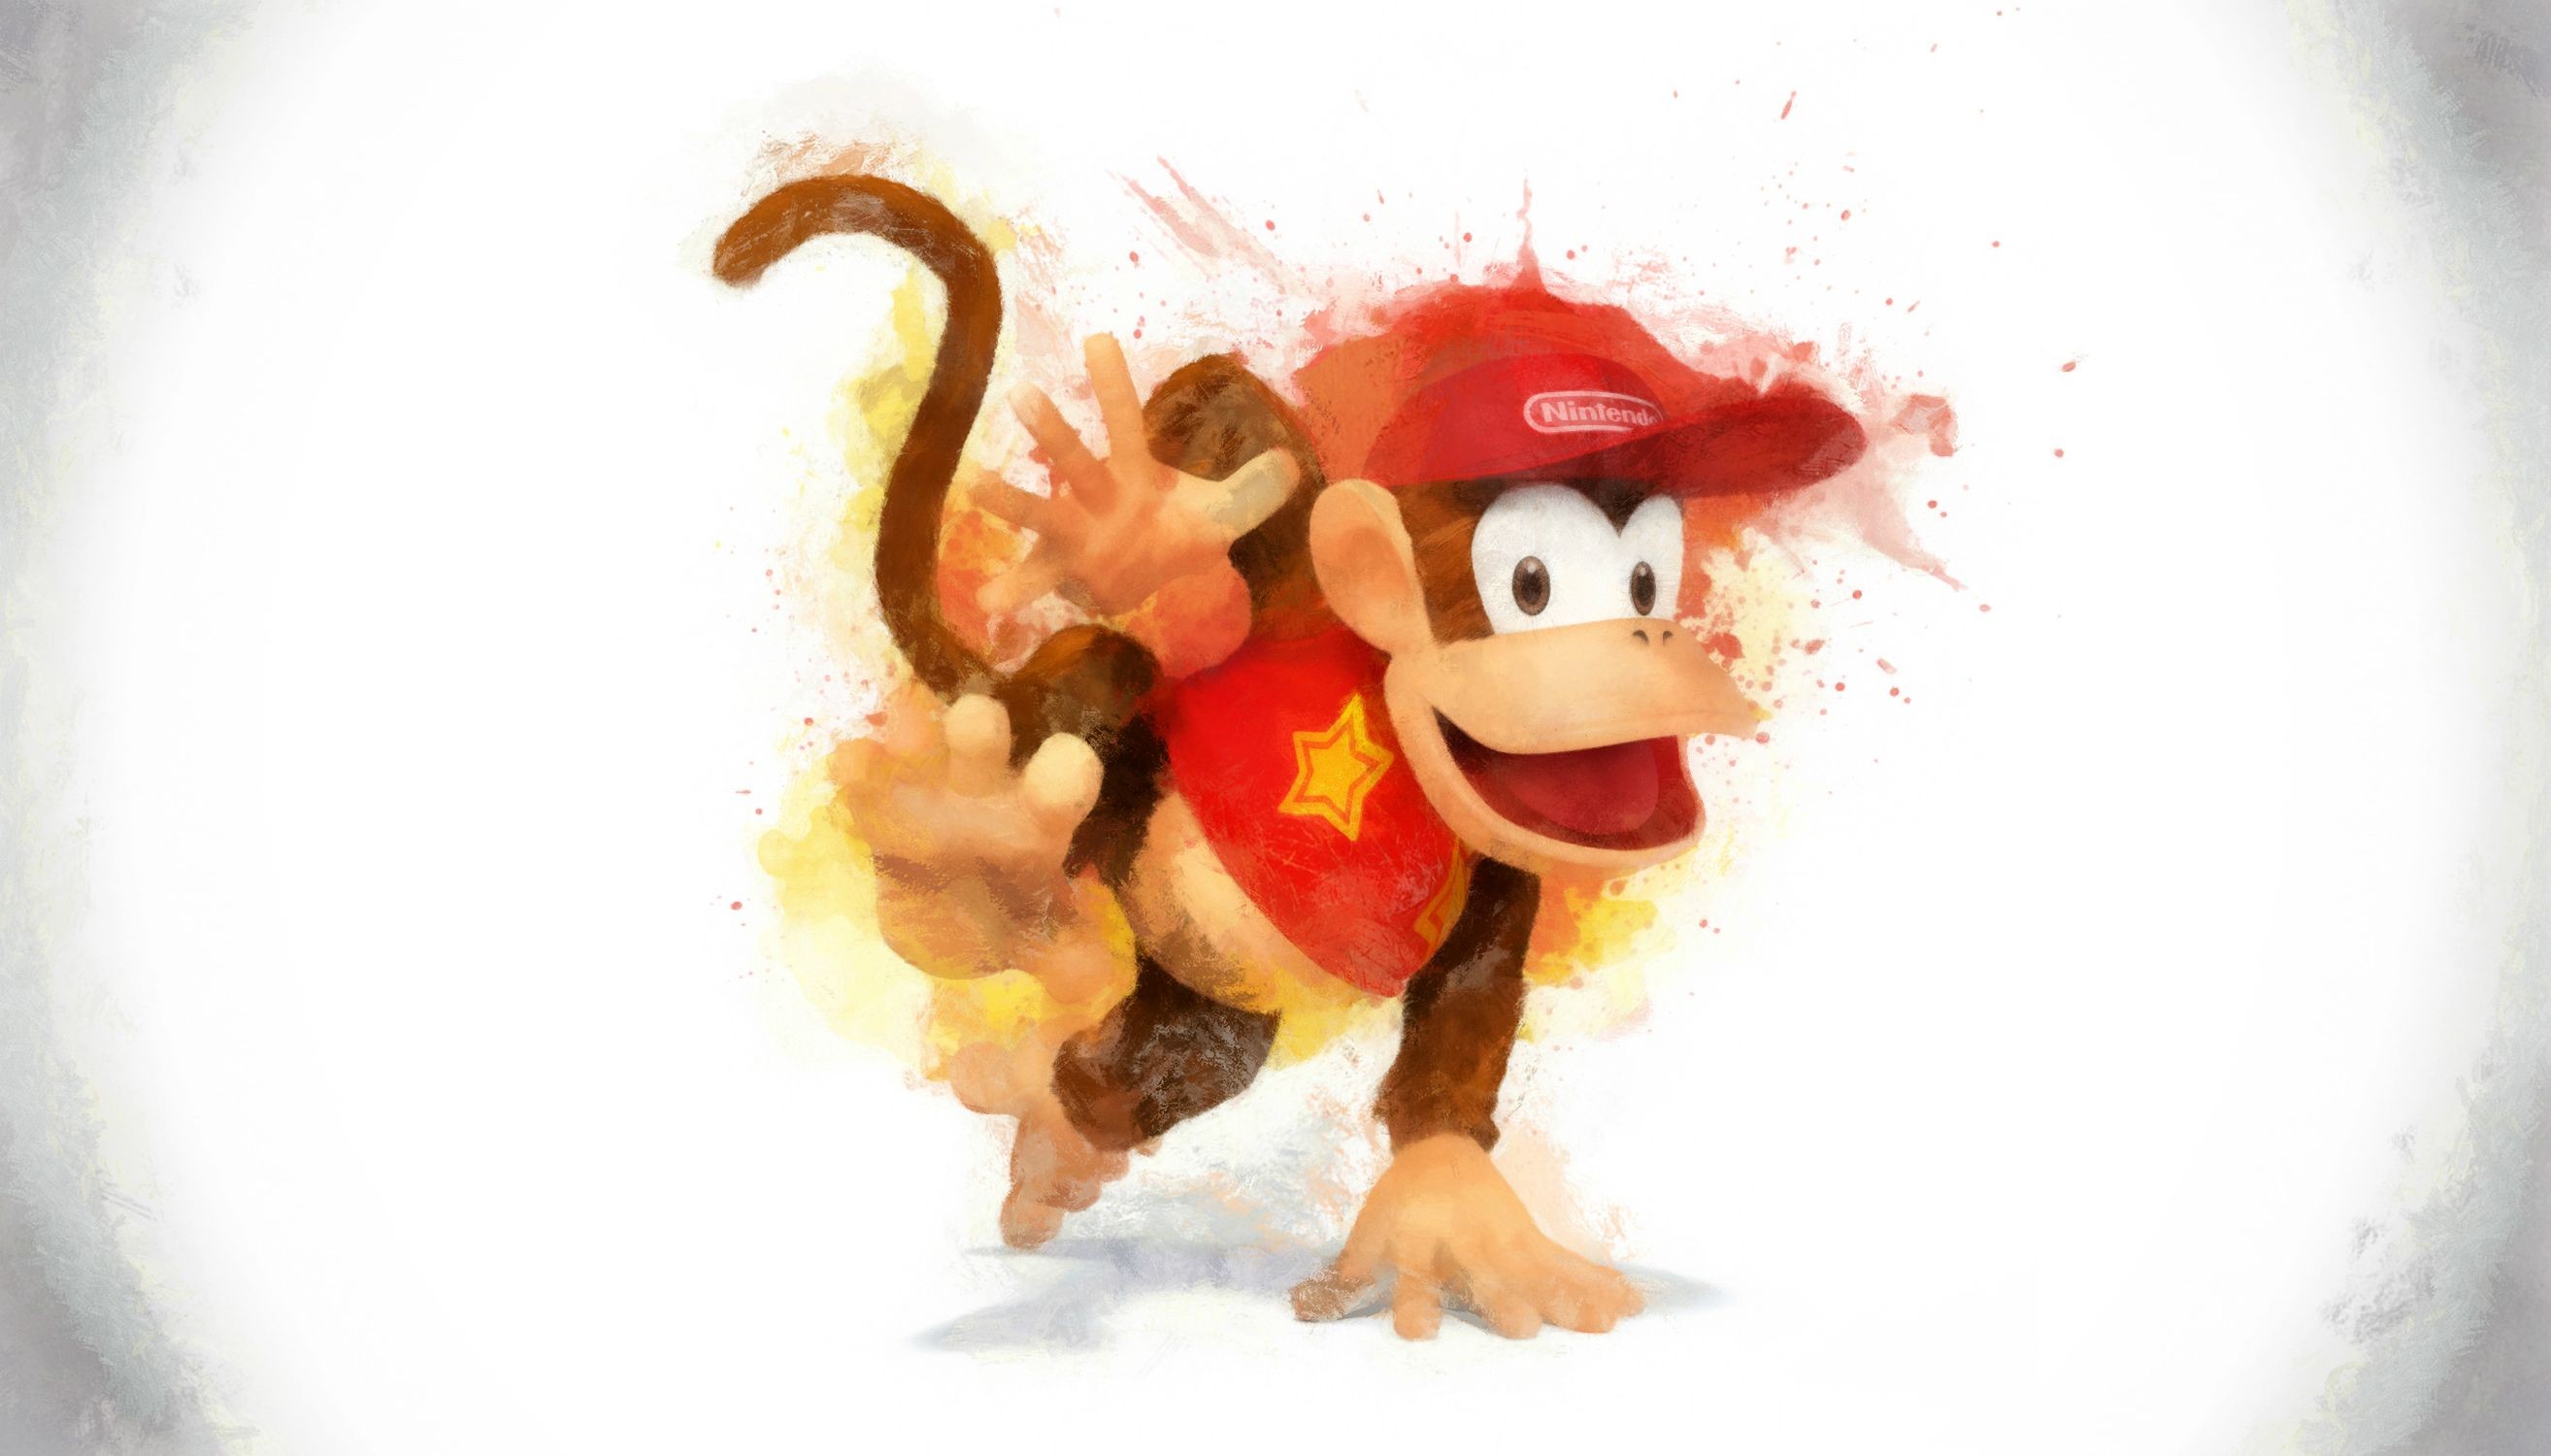 General 2628x1500 Nintendo video games video game art Video Game Heroes Diddy Kong video game characters hat white background